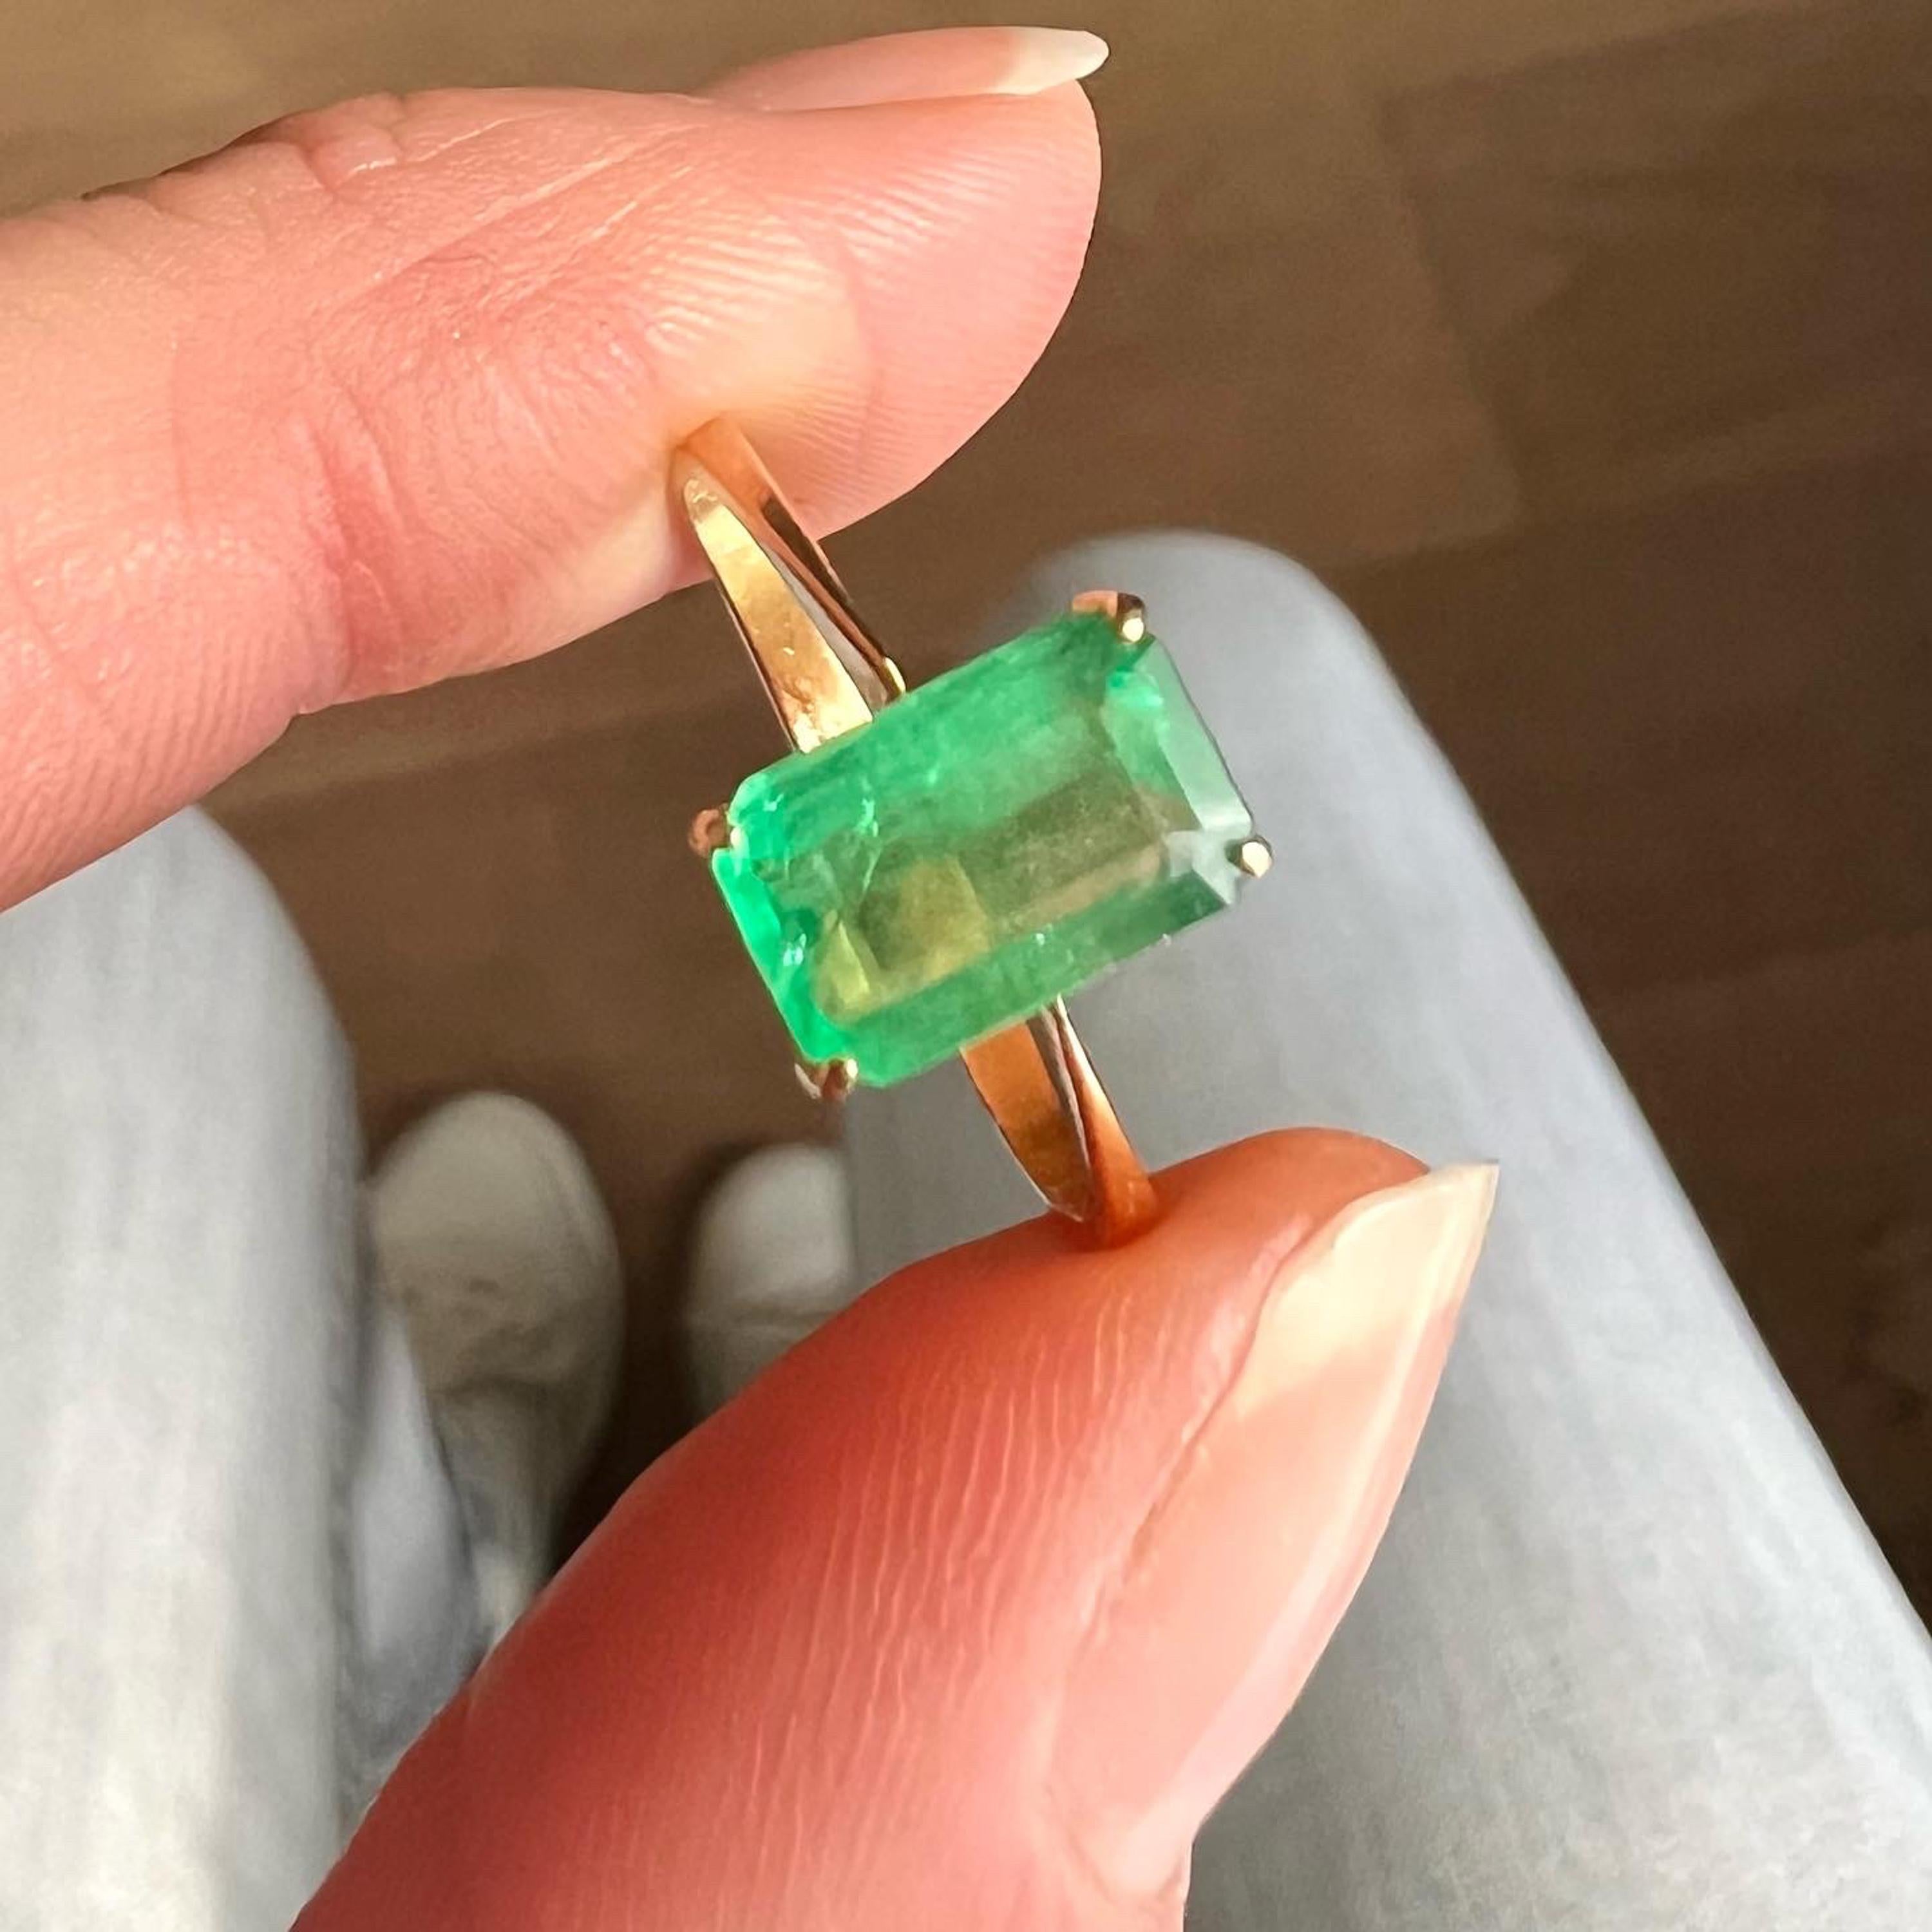 A gorgeous yellow gold vintage emerald cut emerald ring. The natural emerald gemstone has a rich vibrant color and is set in a classic gold band rendered in 18 karat yellow gold. The step cut faceted rectangle green emerald sits along with four soft